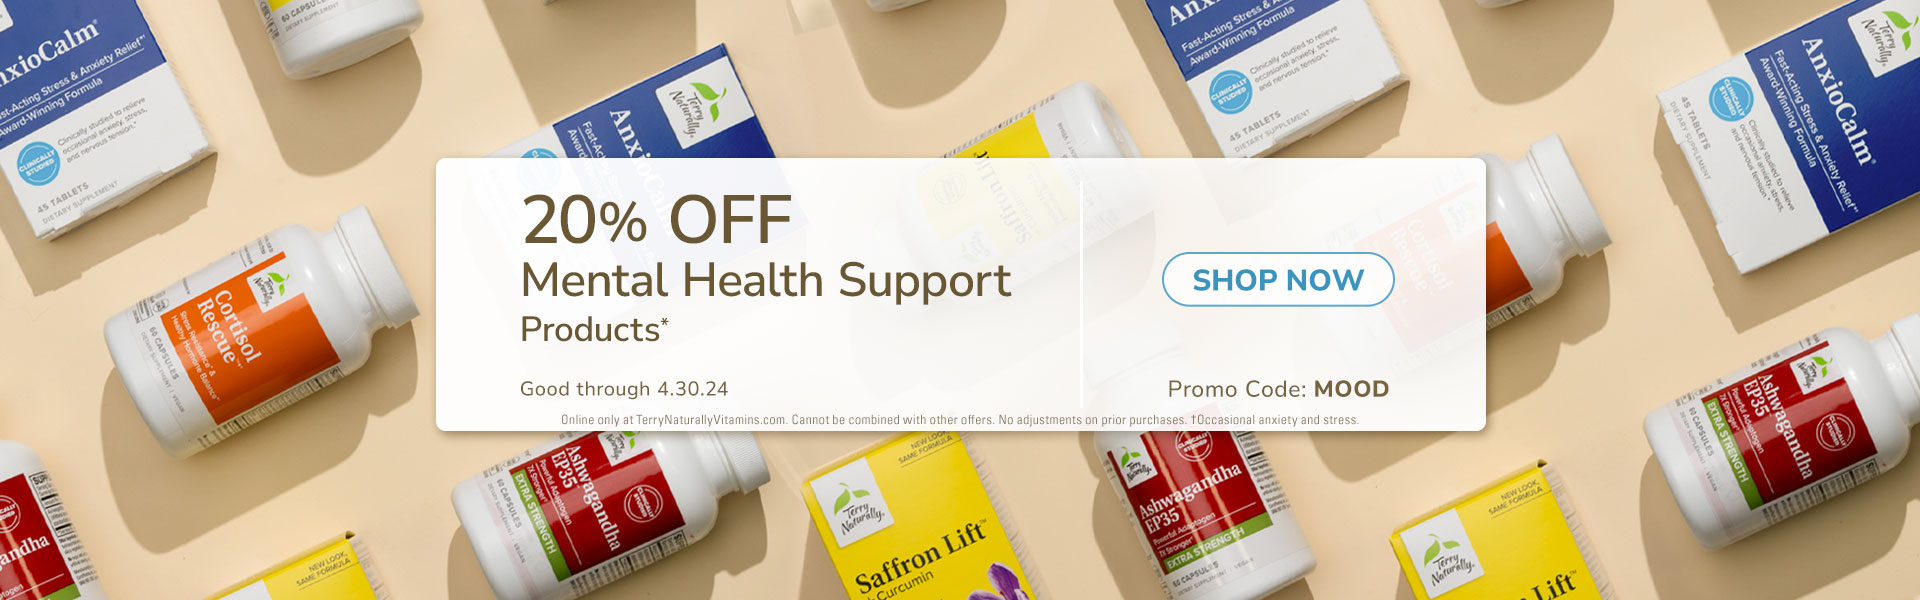 20% OFF Mental Health Support Products* • Promo Code: MOOD Good through 4.30.24